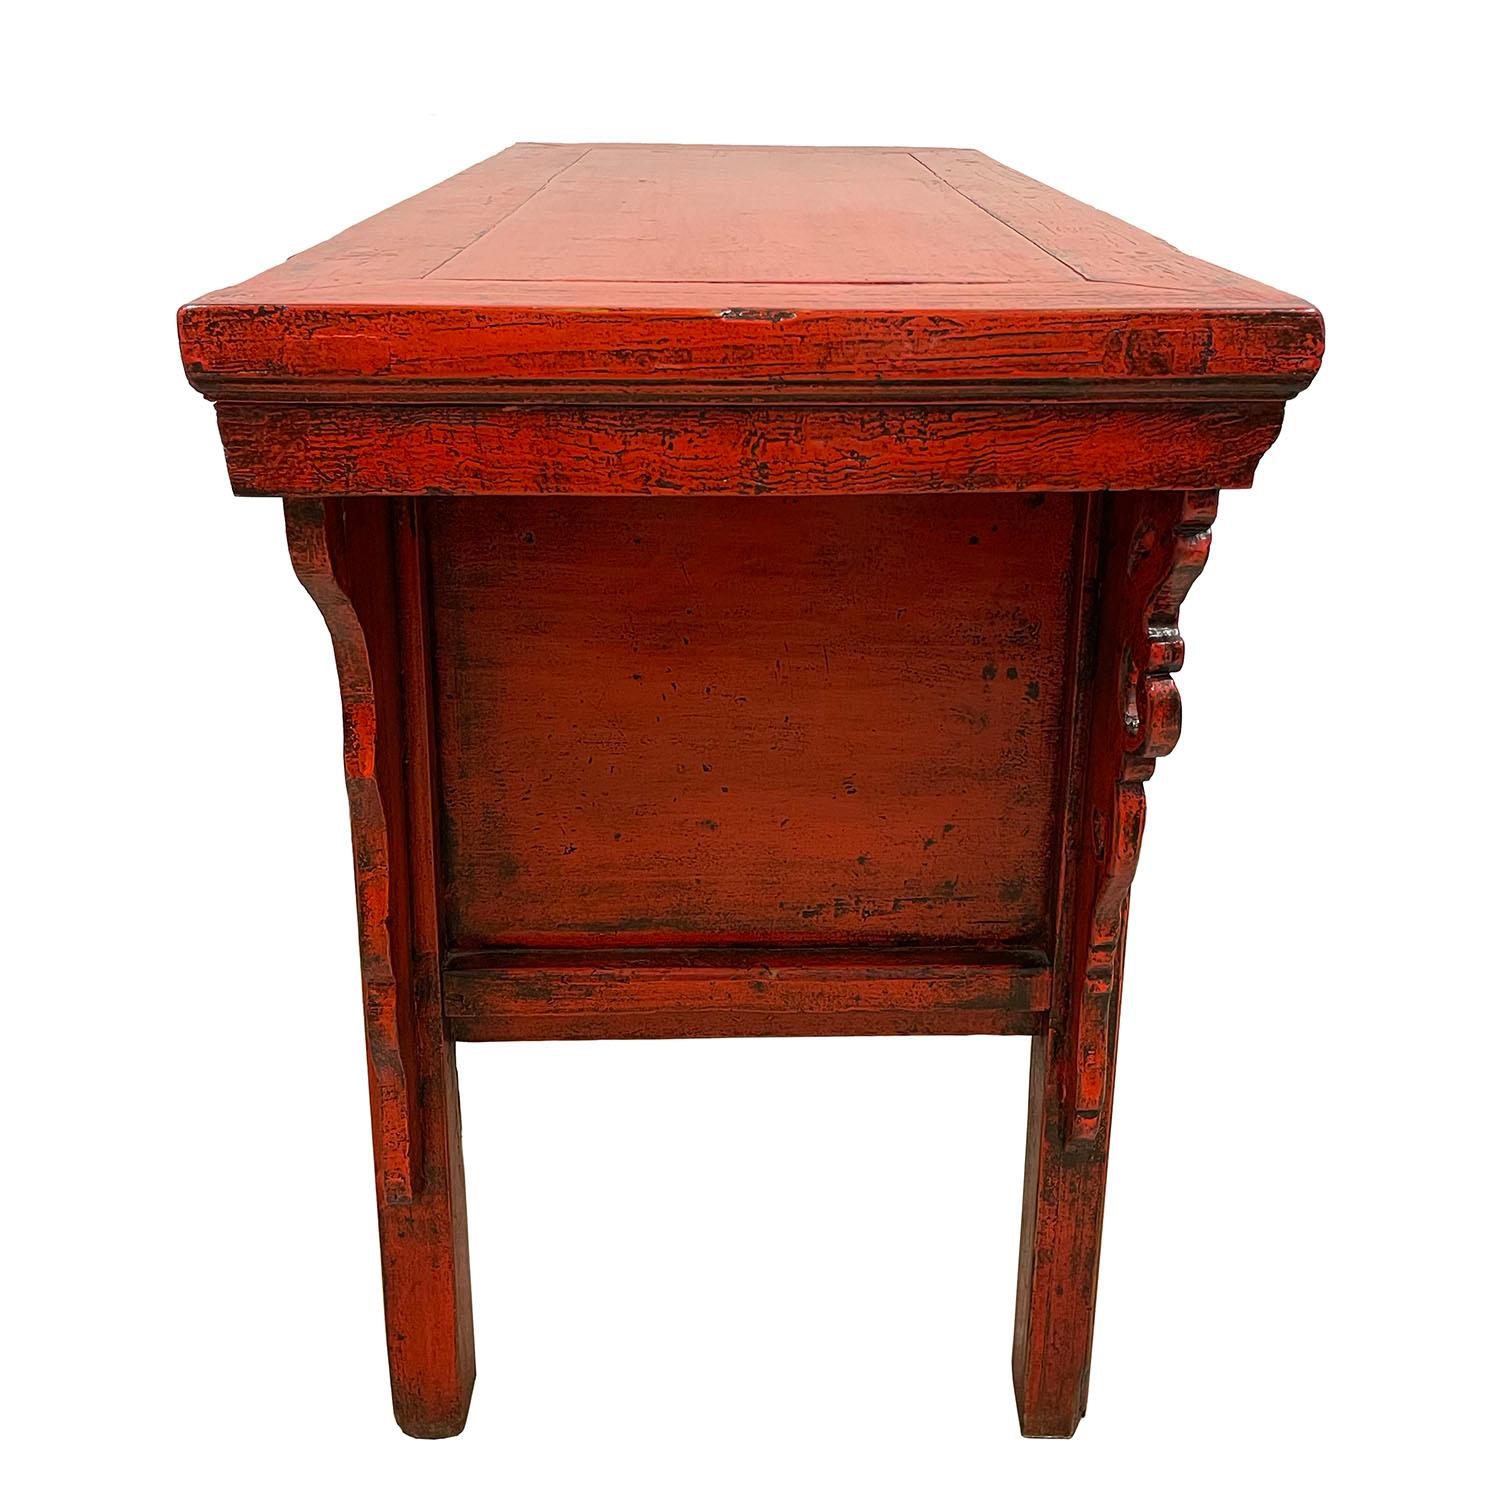 19th Century Antique Chinese Carved Red Lacquer Console Table / Sideboard For Sale 2